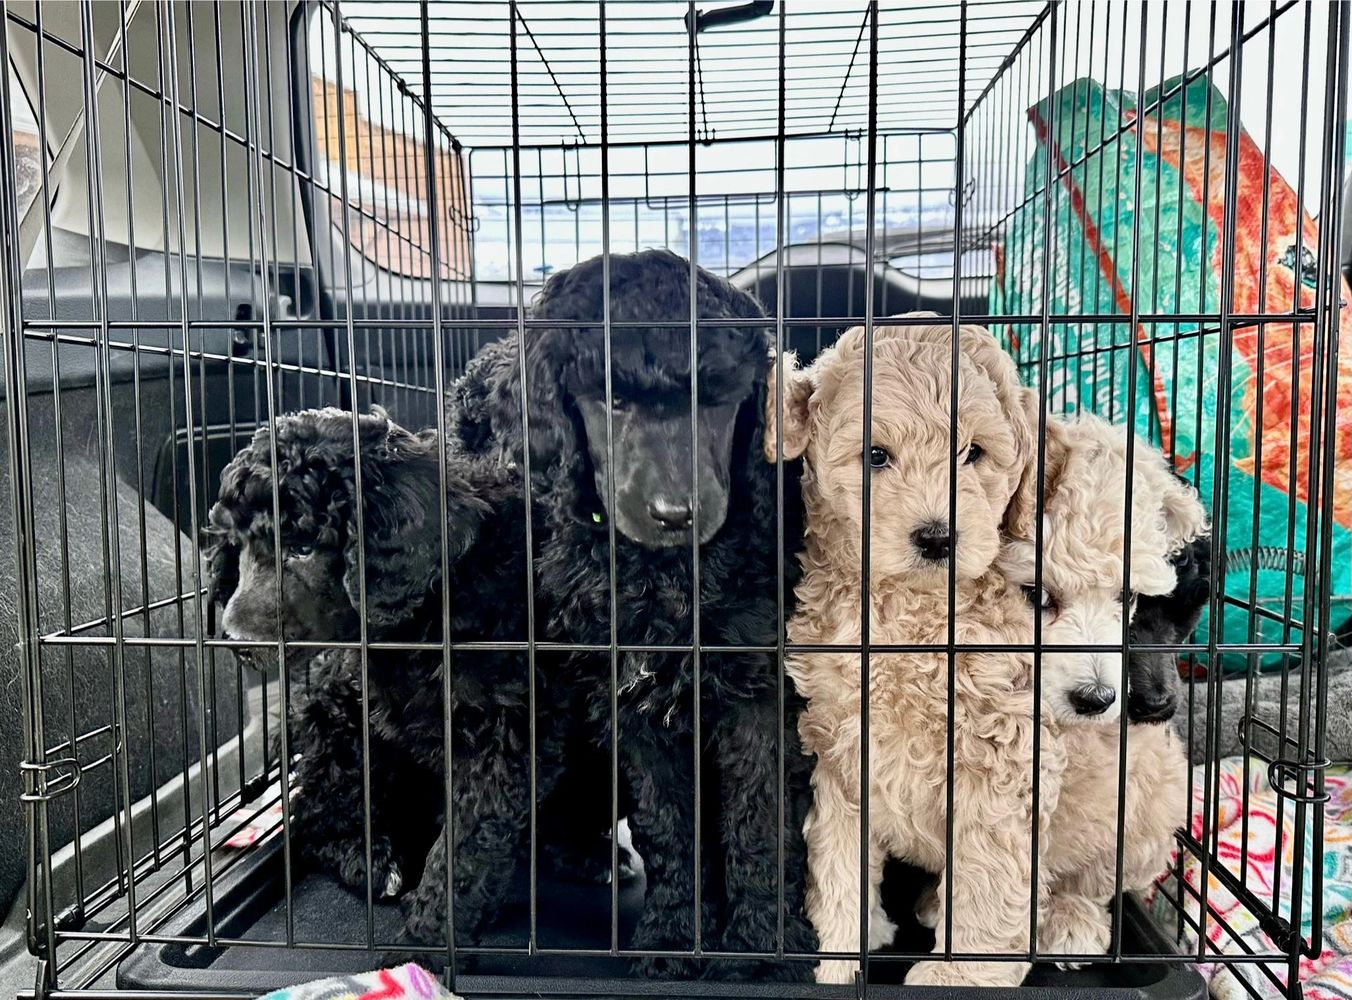 A litter of Moyen Poodle puppies on their first car ride.